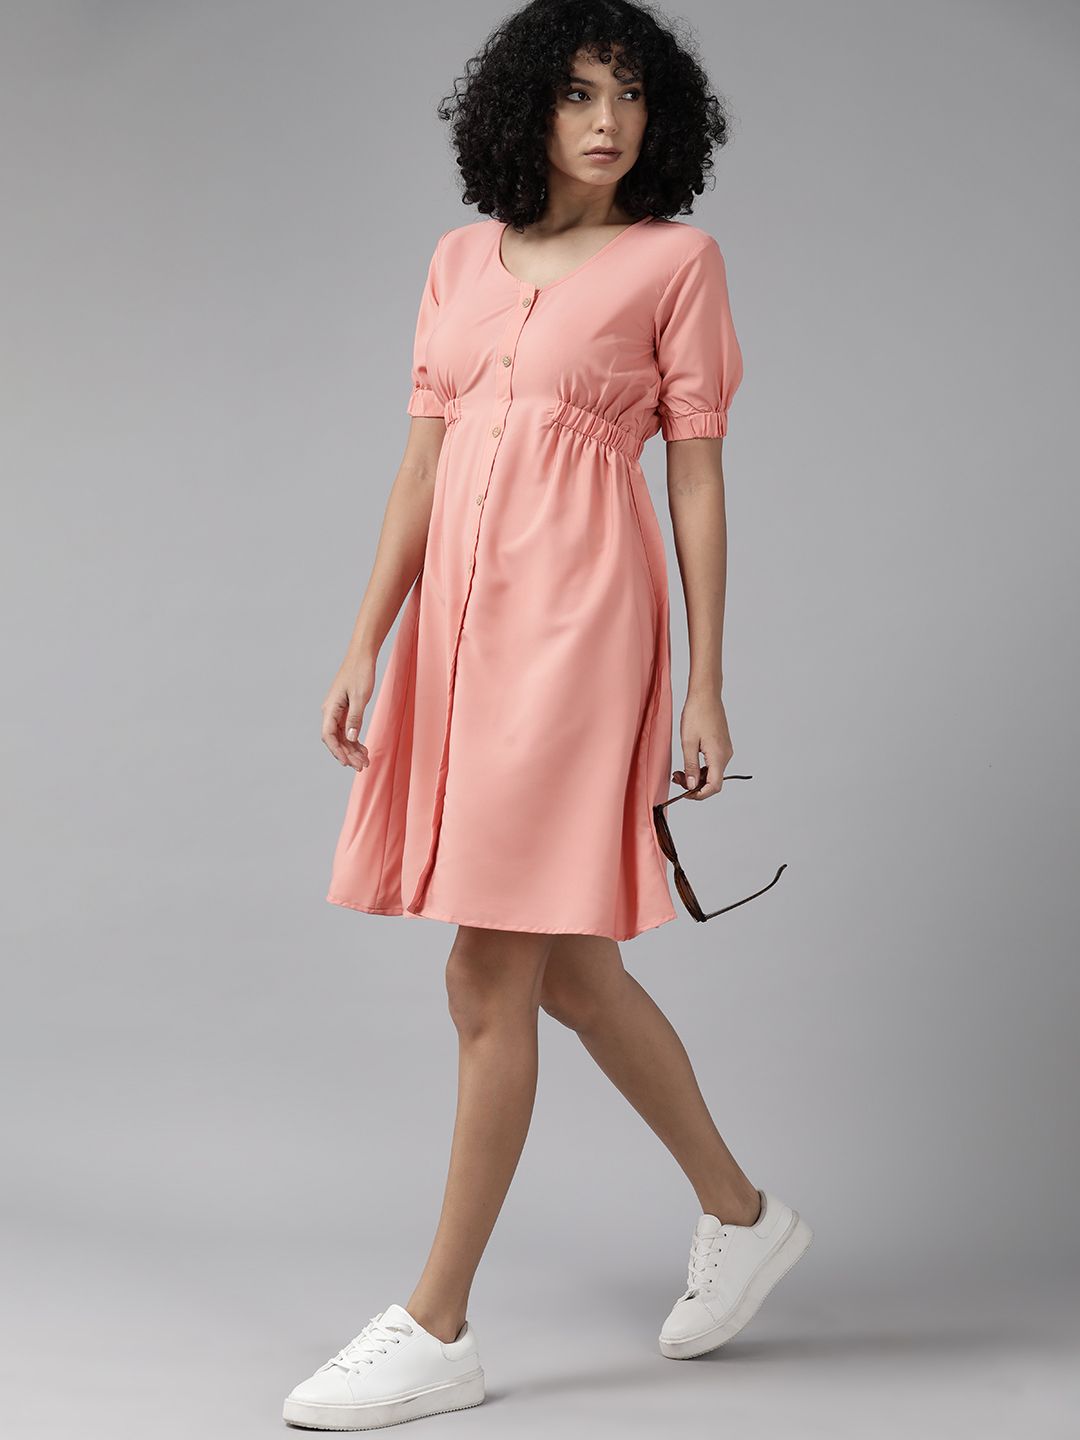 Roadster Puff Sleeves Crepe Fit & Flare Dress Price in India